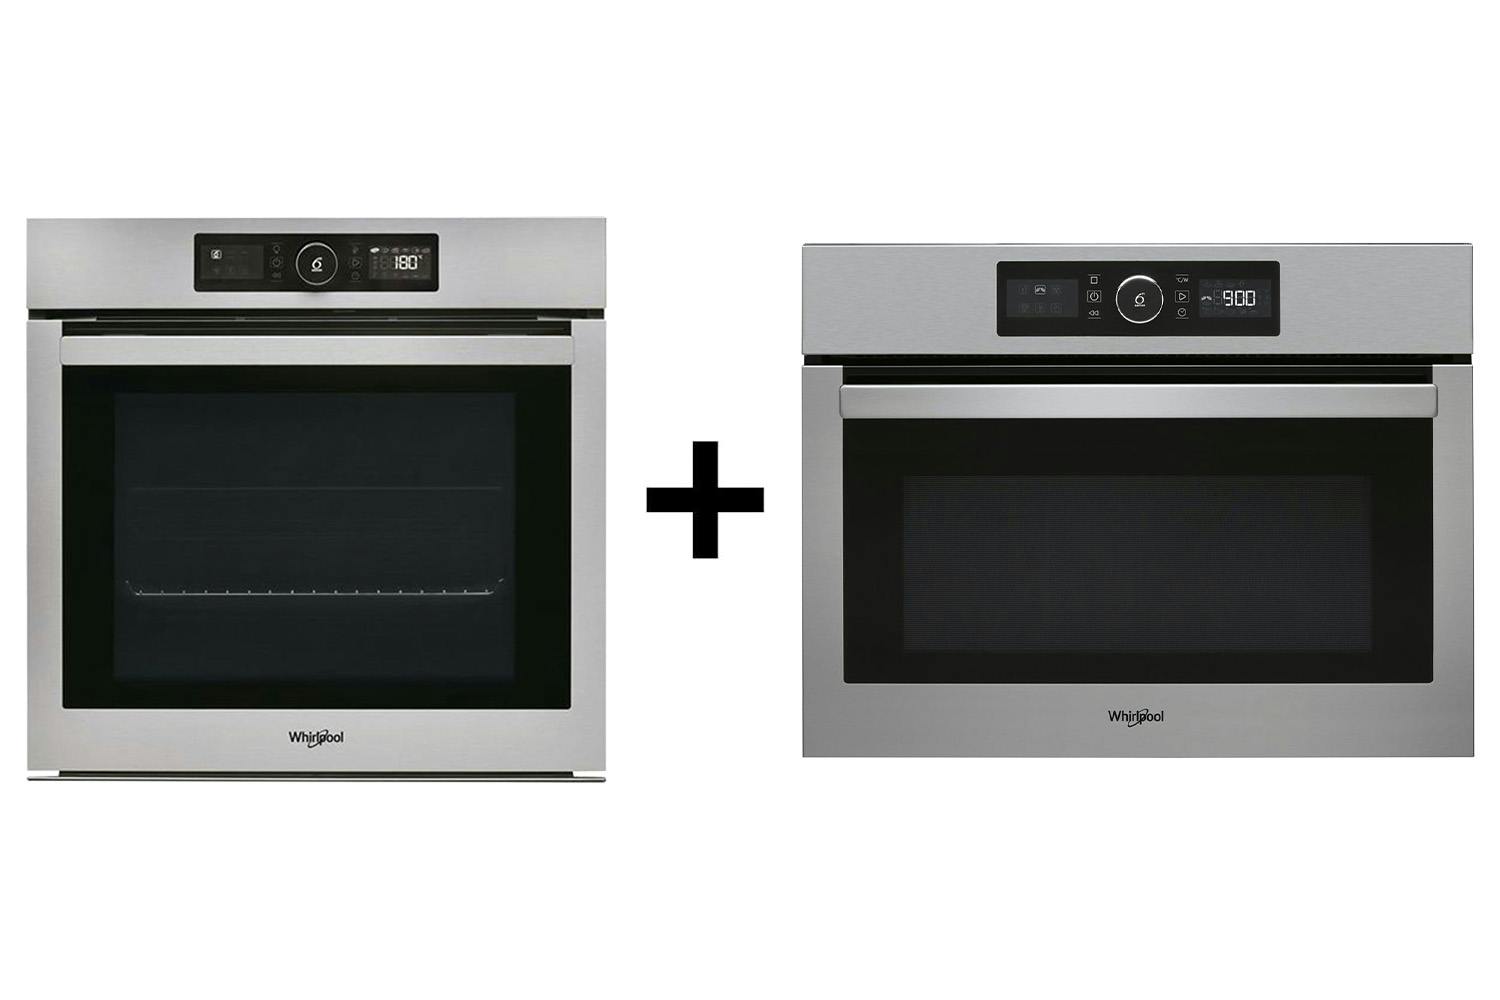 Whirlpool Built-in Single Oven & 40L 900W Built-in Microwave Oven Bundle